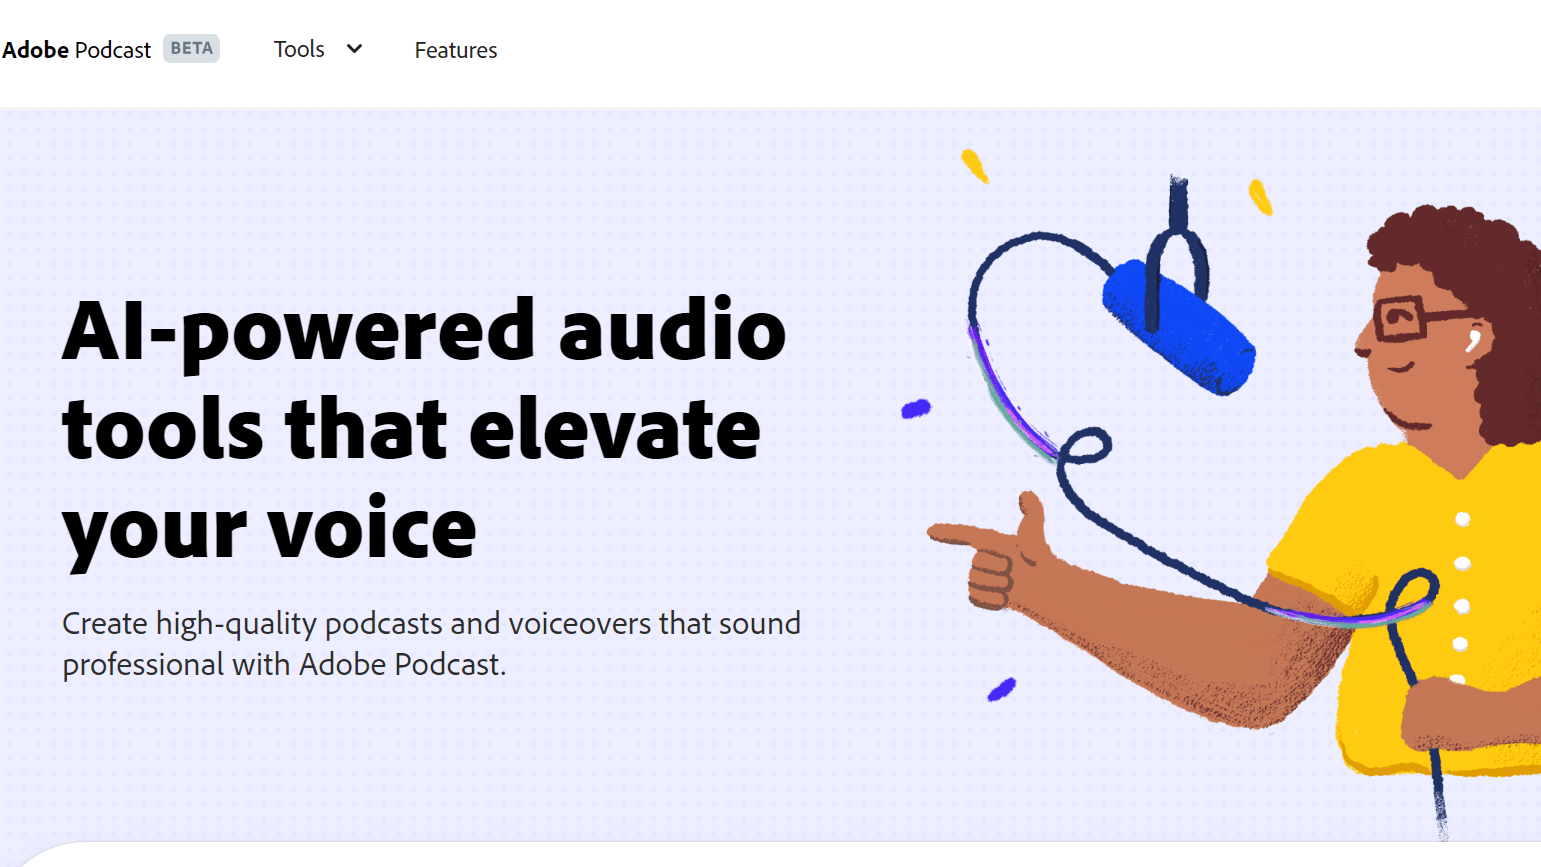 Adobe Podcast - AI Tool for Recording and Editing Audio